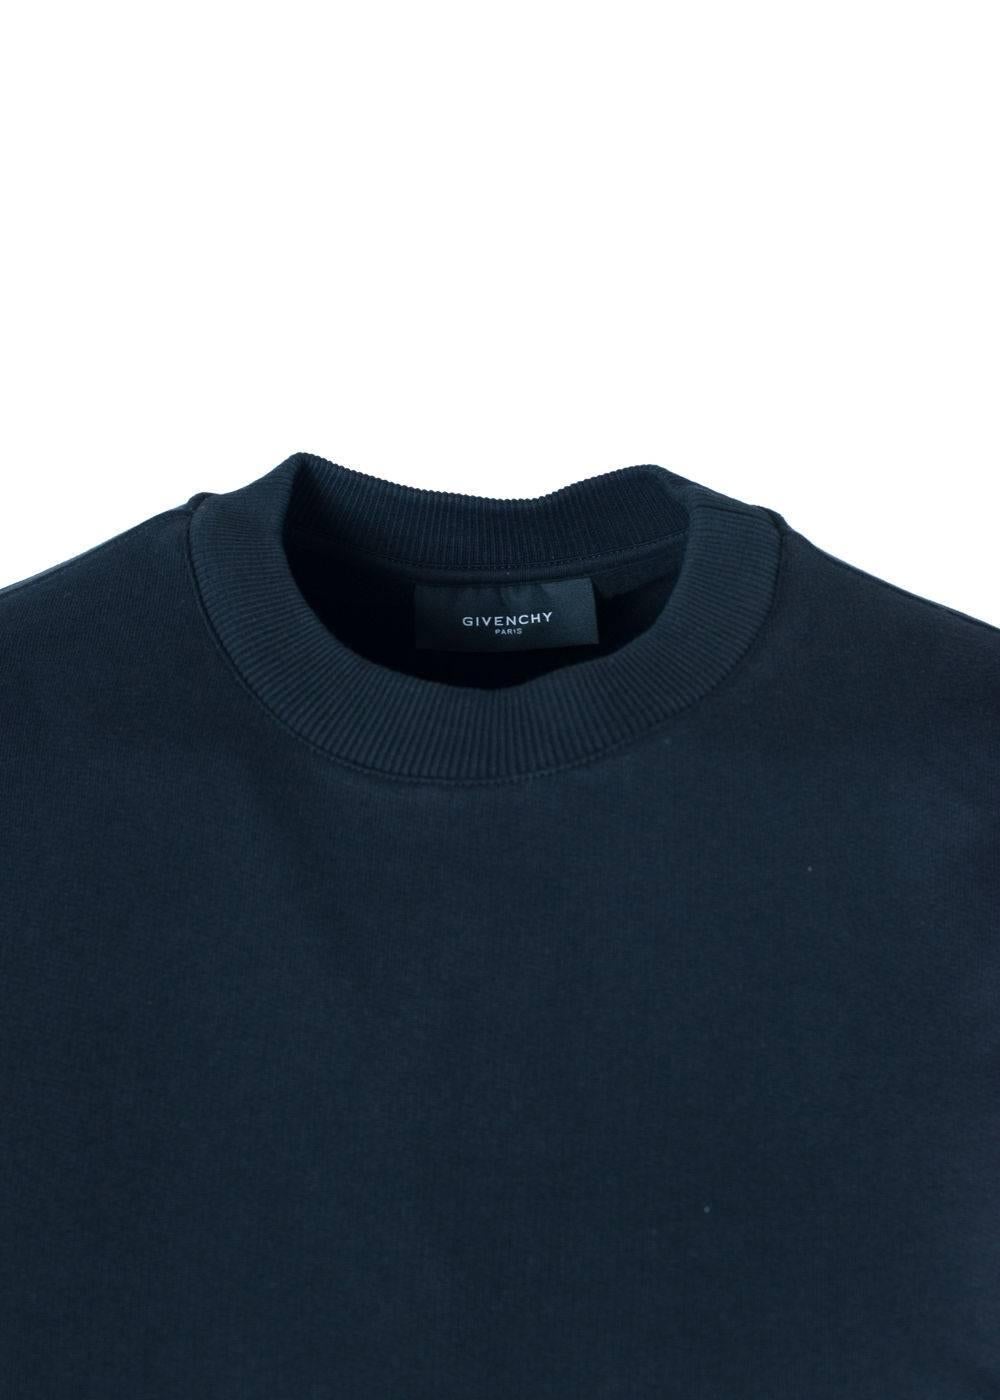 Brand New Givenchy Men's Sweatshirt
Original Tag
Retails in Stores & Online for $695
Men's Size XS Fits True to Size

Givenchy's simplistic and minimalistic sweatshirt in a solid black tone with a rectangular graphic print on the back of top. Made